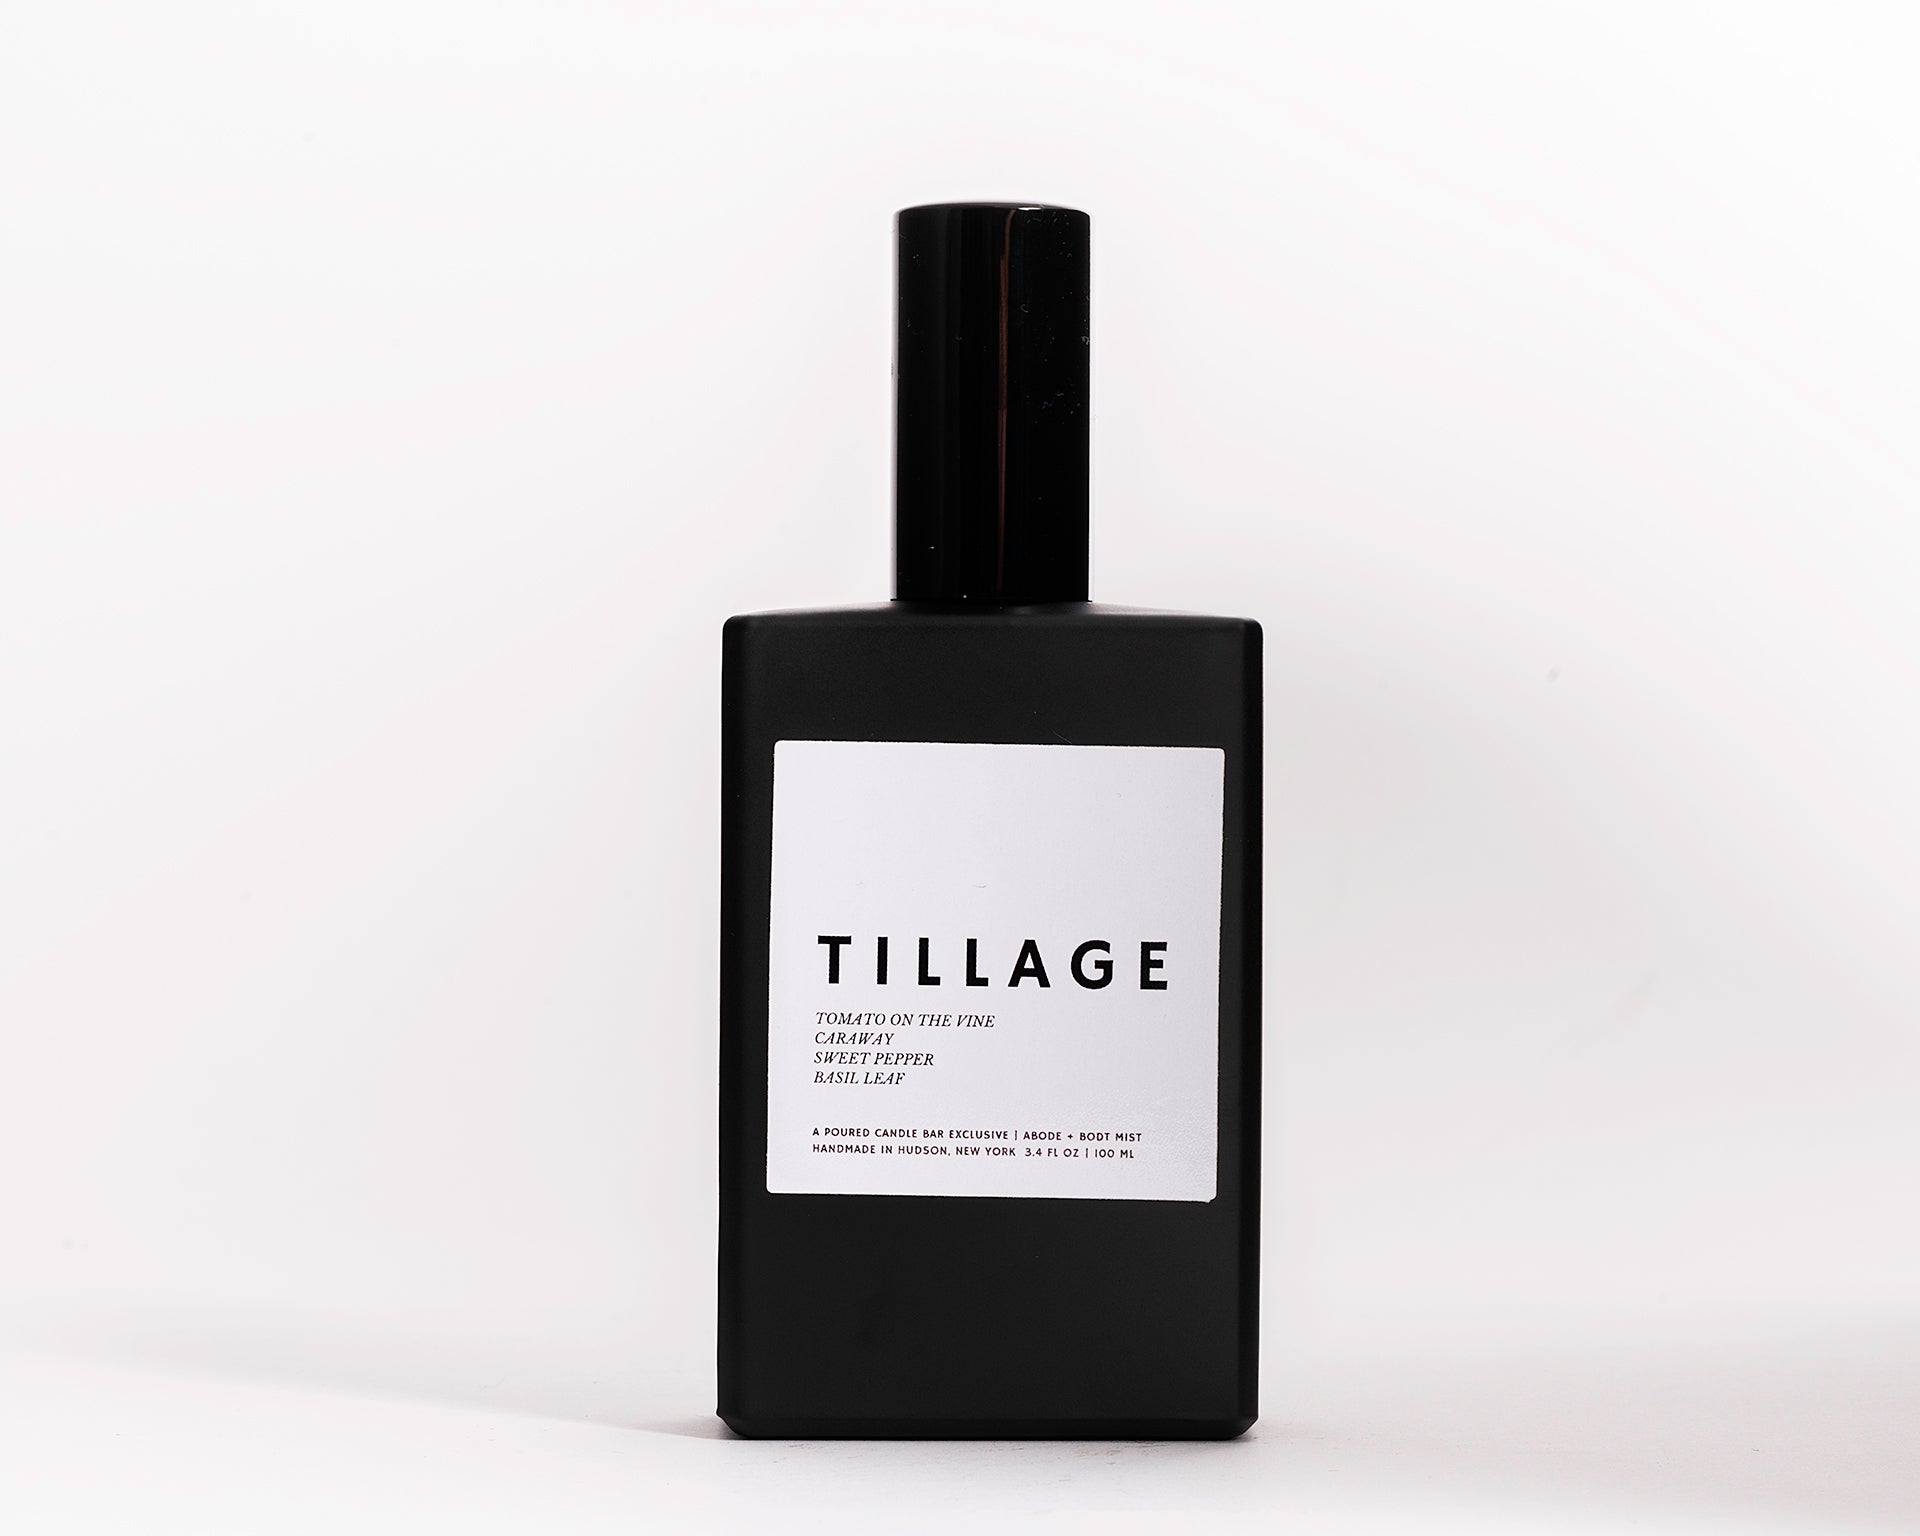 100 ml room spray in a black rectangular glass vessel. Profile Description: Fresh herbs with raw vegetables + subtle moss and spice  Notes: Thick Stemmed Vines, Oak Moss, Basil, Tomato, Turned Earth, Sweet Pepper